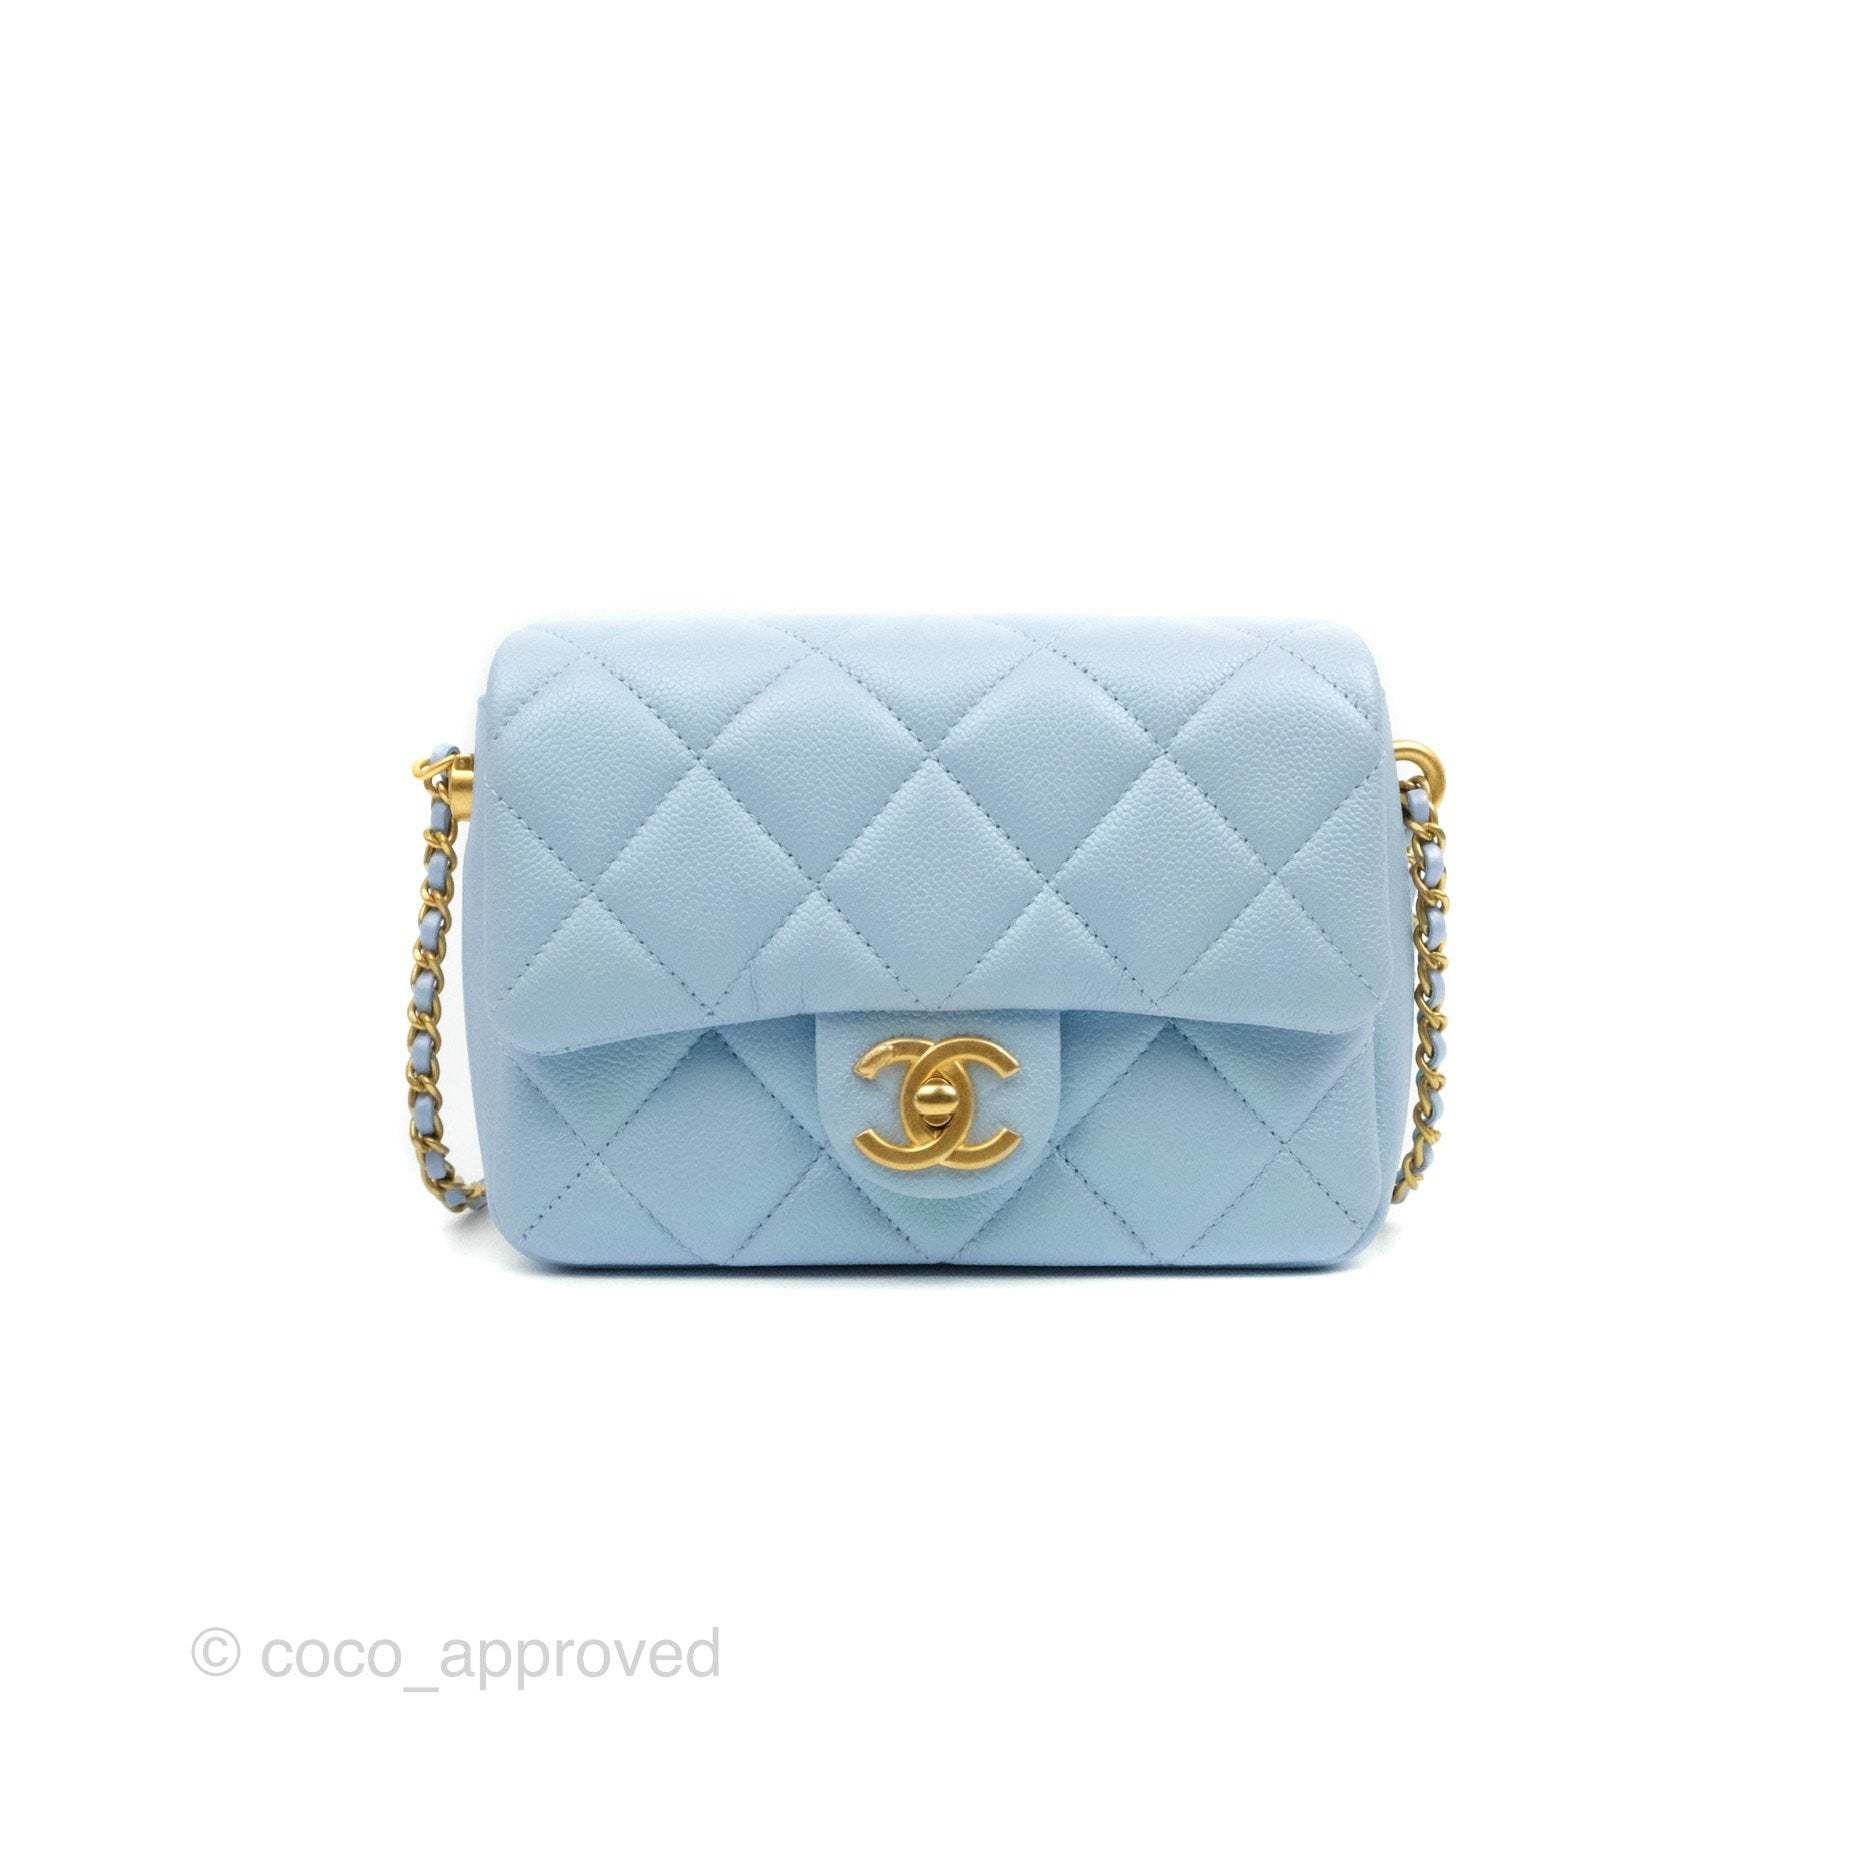 Chanel My Perfect Mini Flap, Blue Iridescent Caviar Leather, Gold